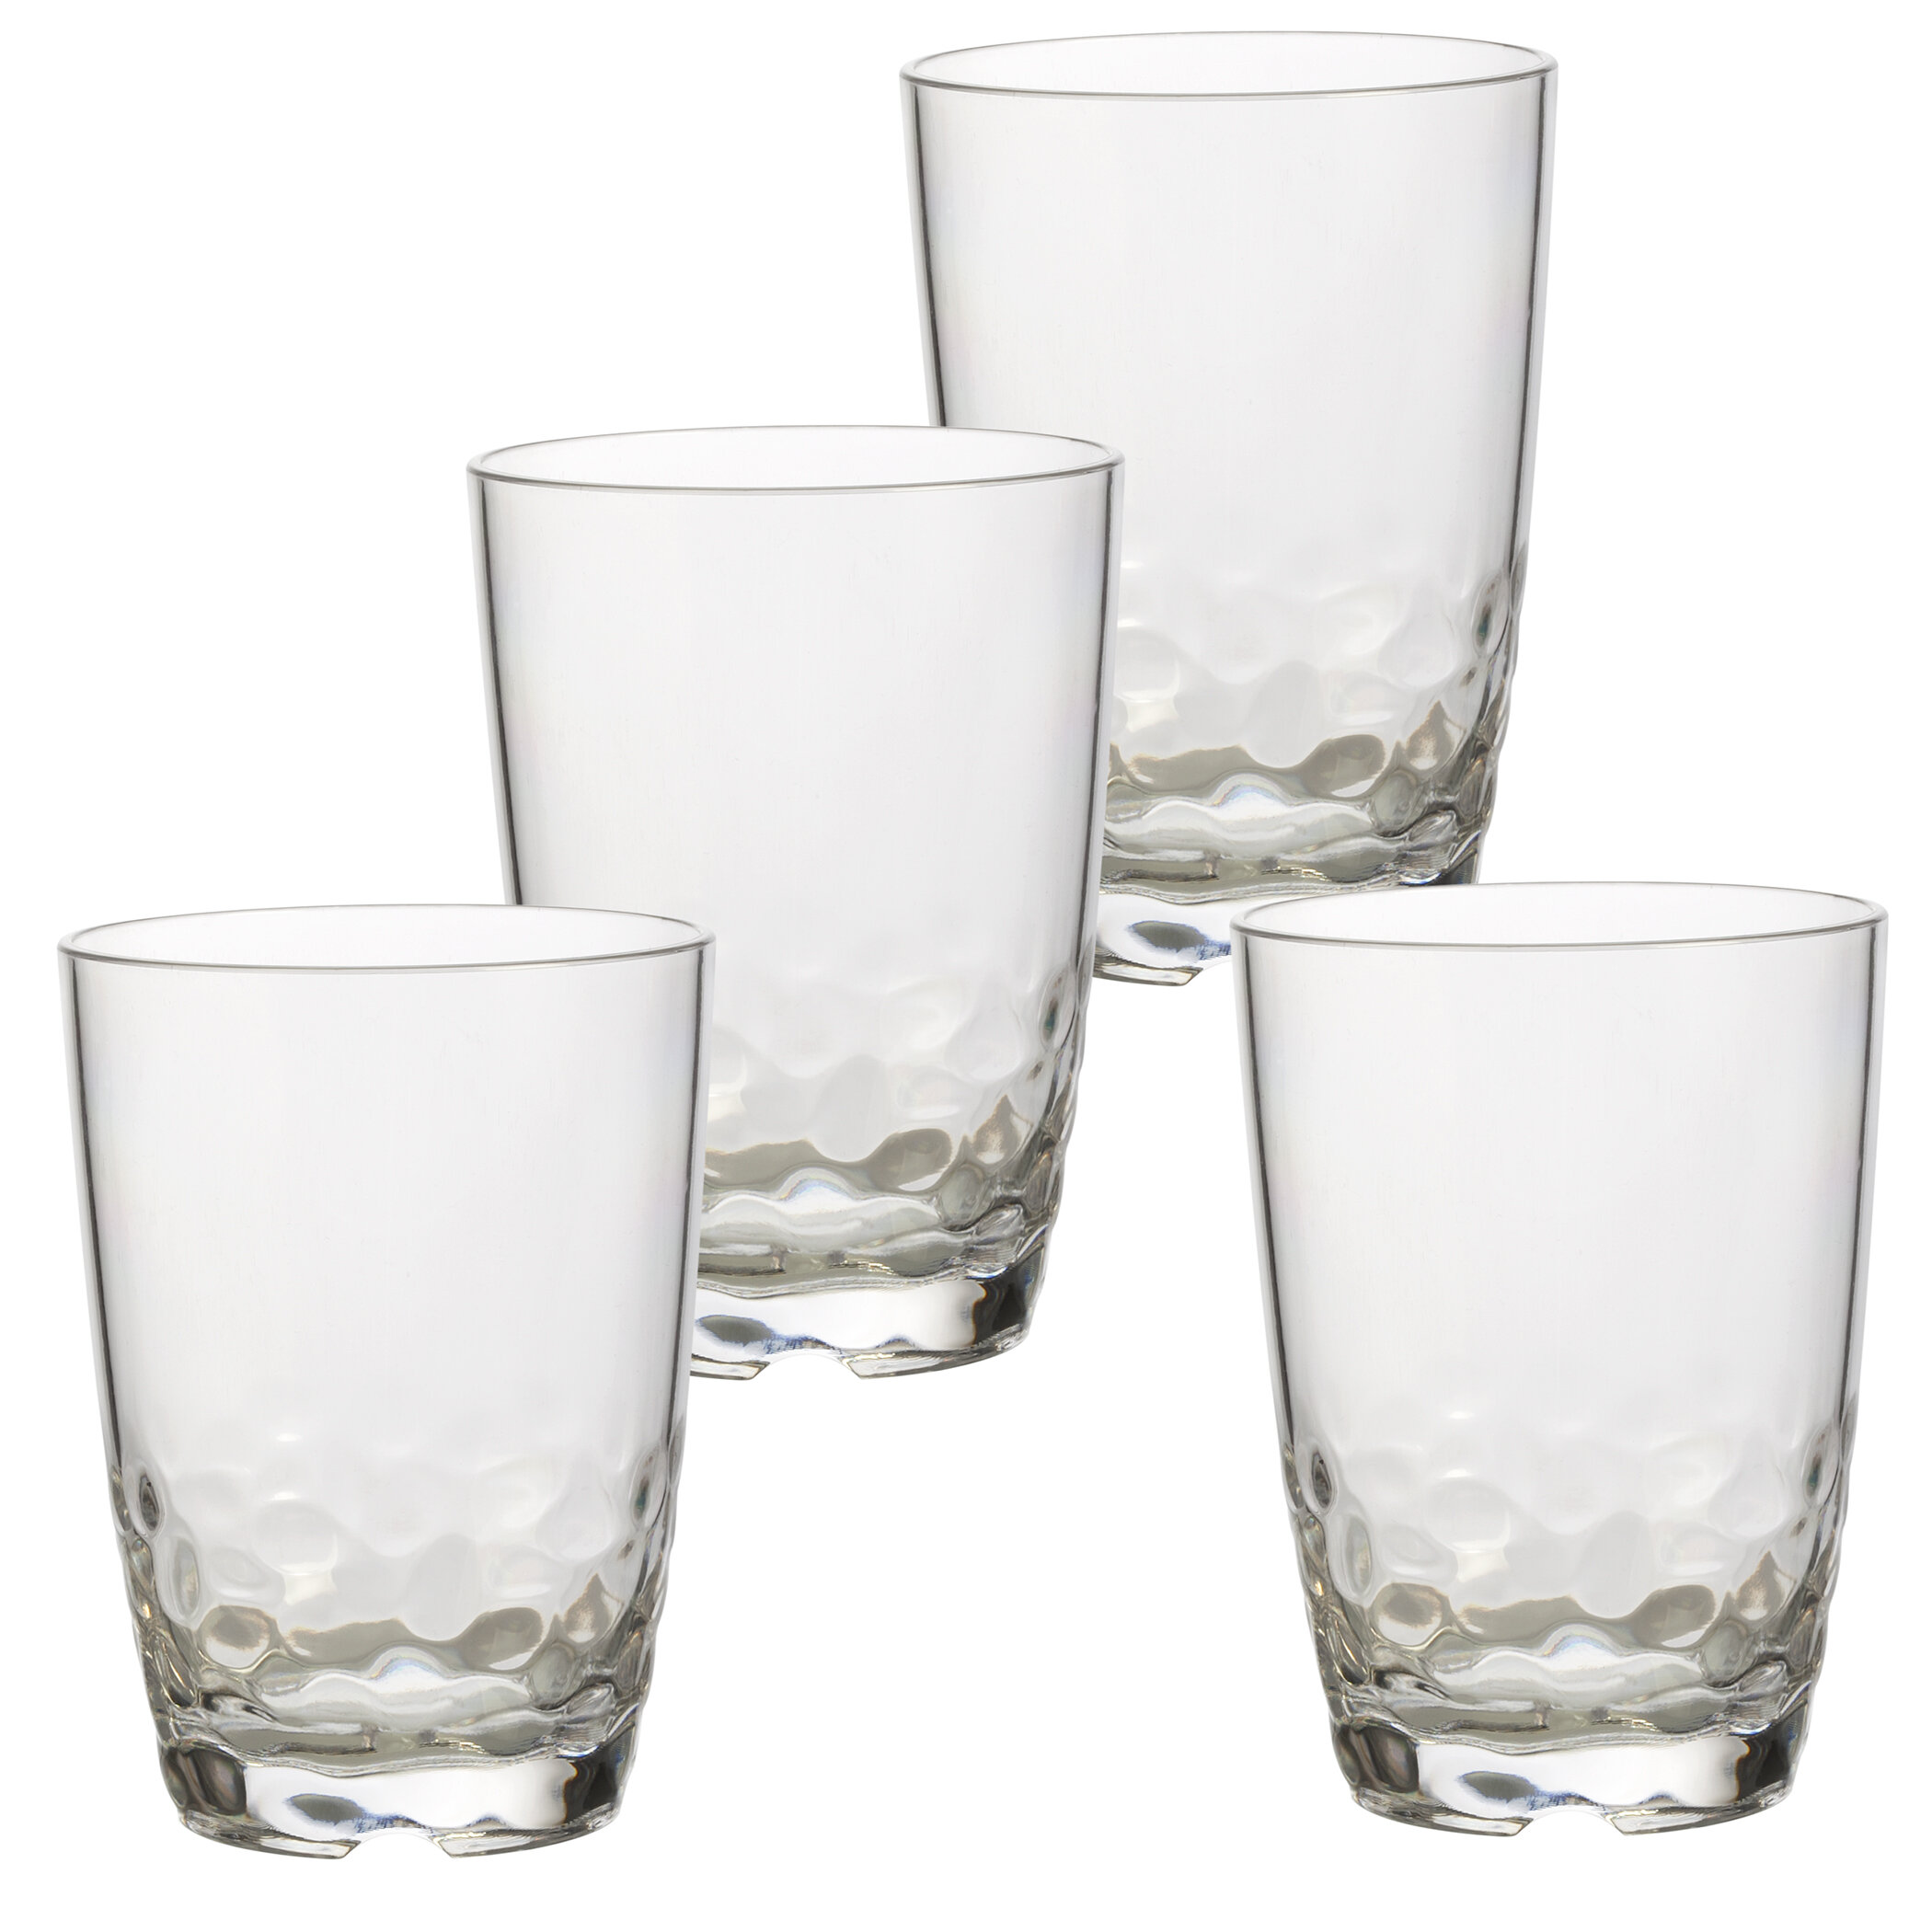 Acrylic Highball Drinking Glasses  Tumbler Cups Set of 4 14 And 16 OZ BPA Free 